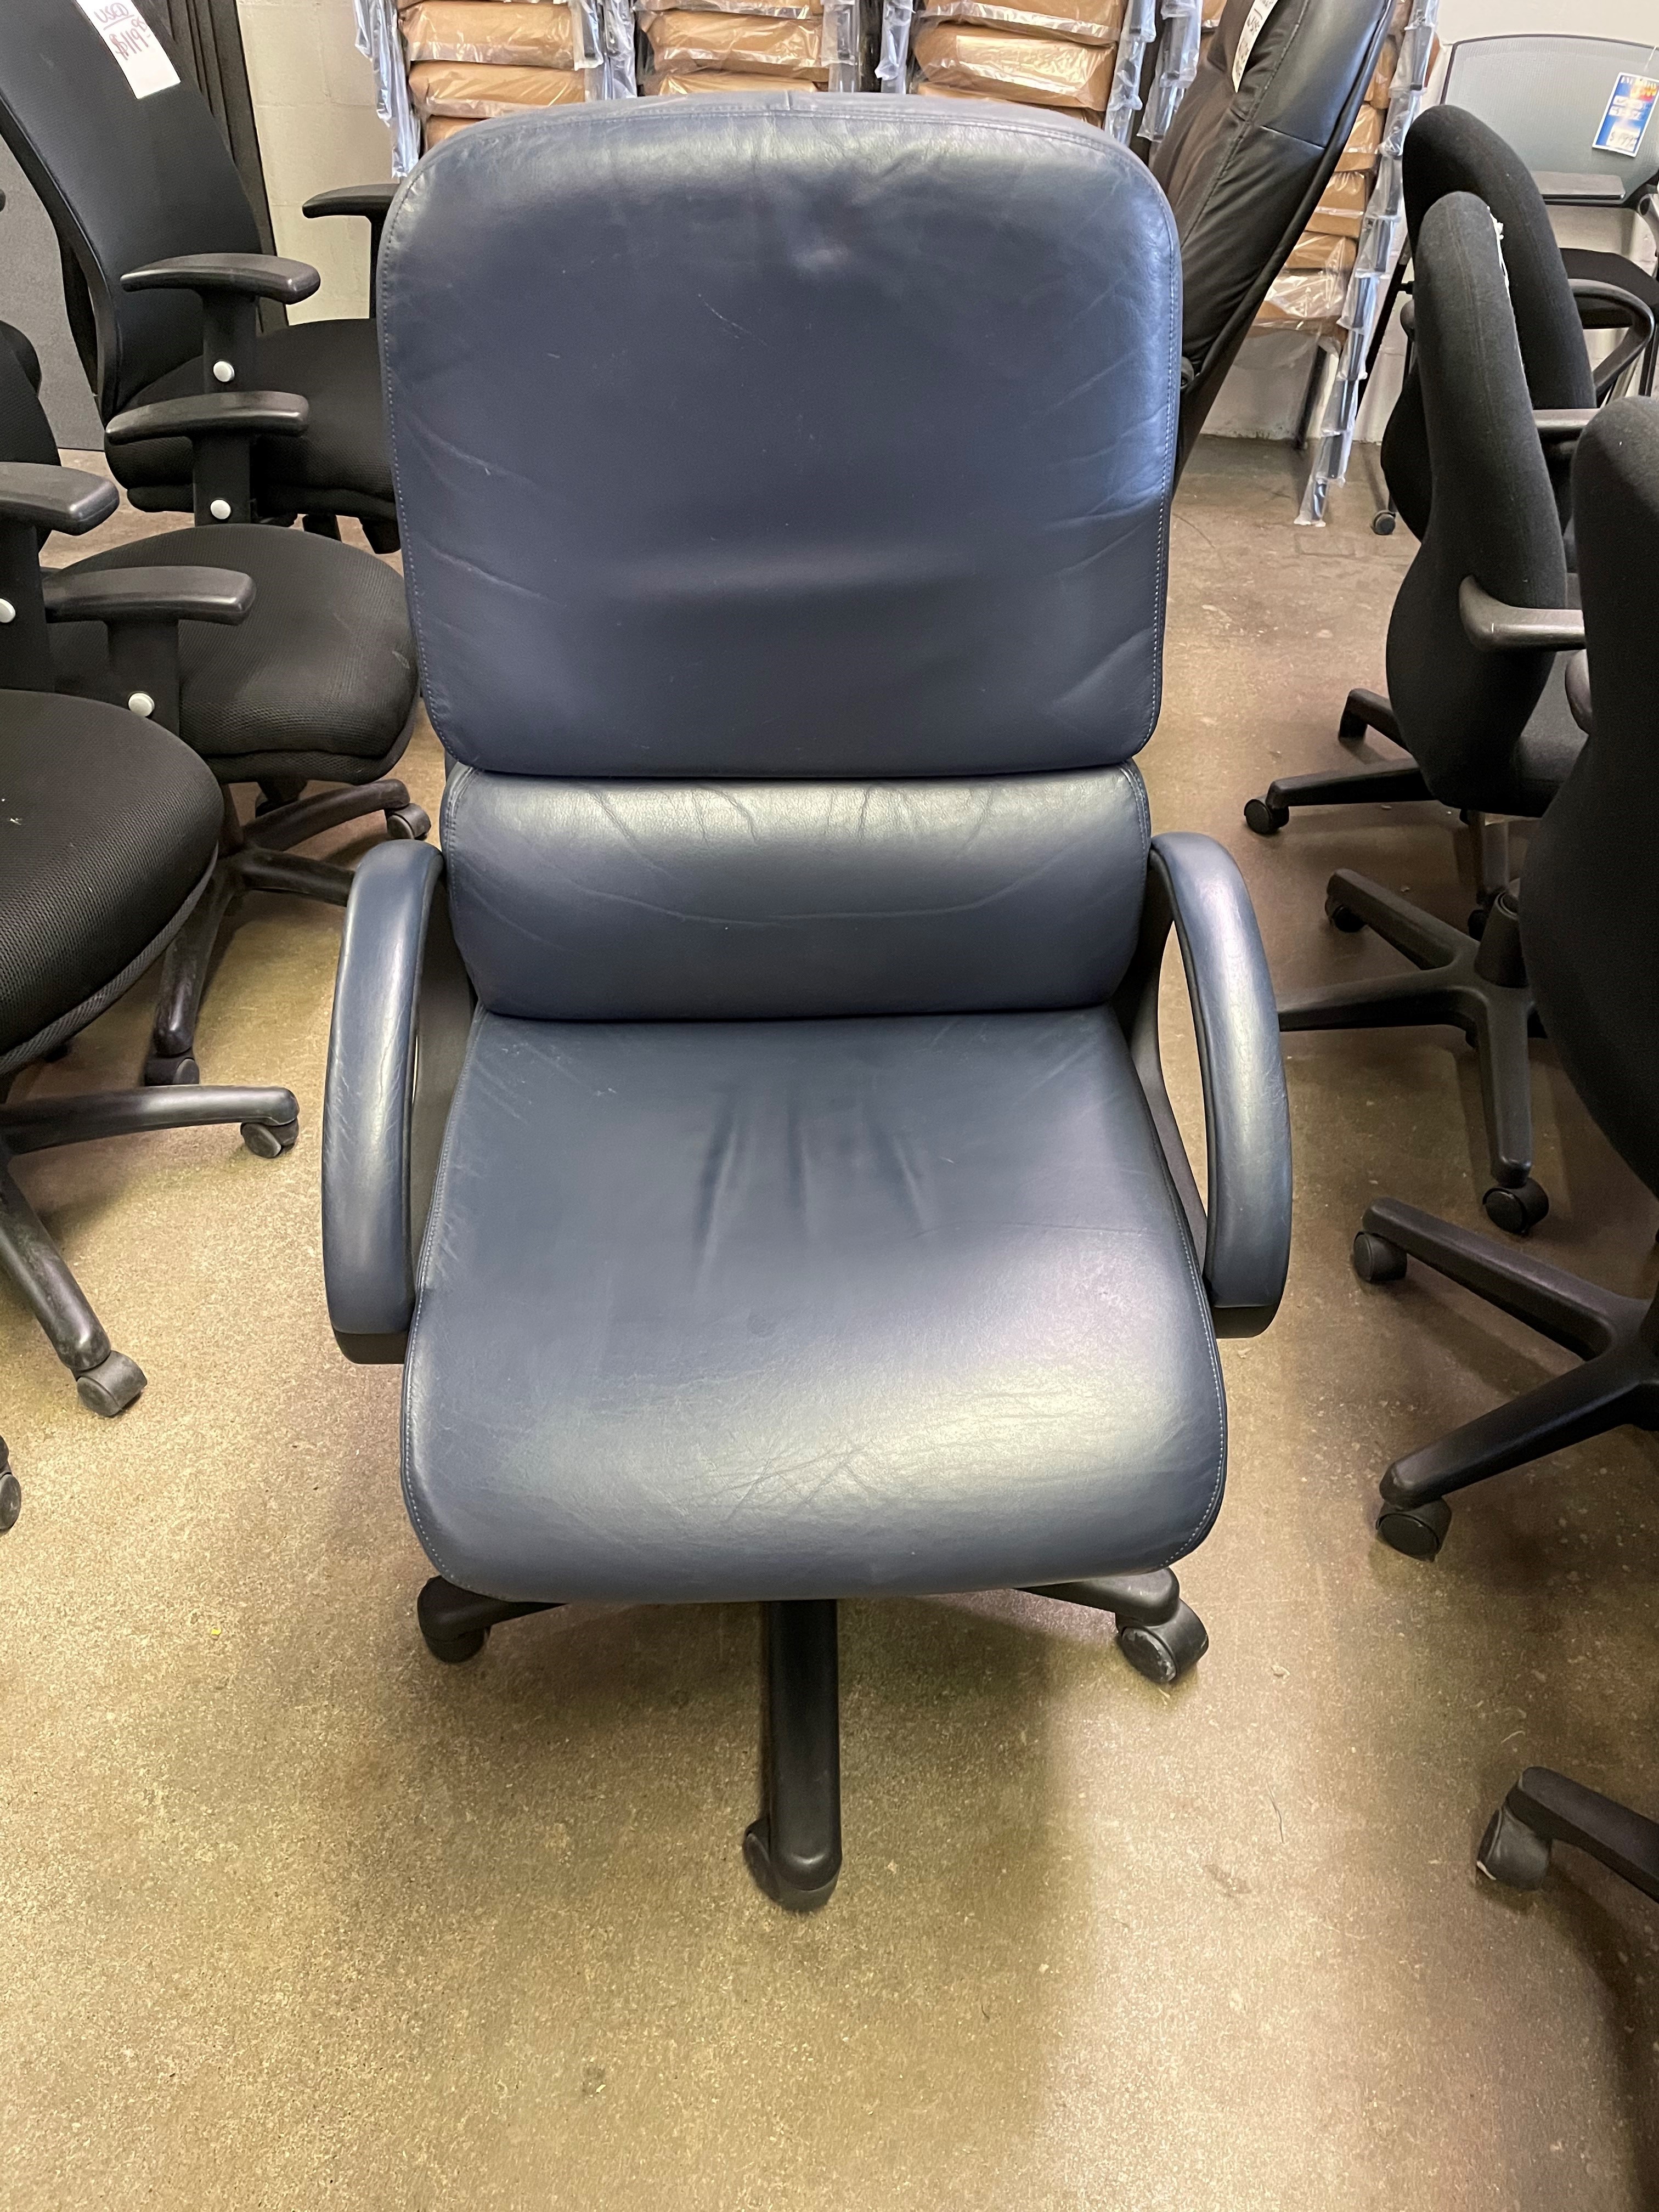 Used LA-Z-BOY Executive Chairs | | New-Used Office Furniture, office chairs,  conference tables, desks Indianapolis, Indiana